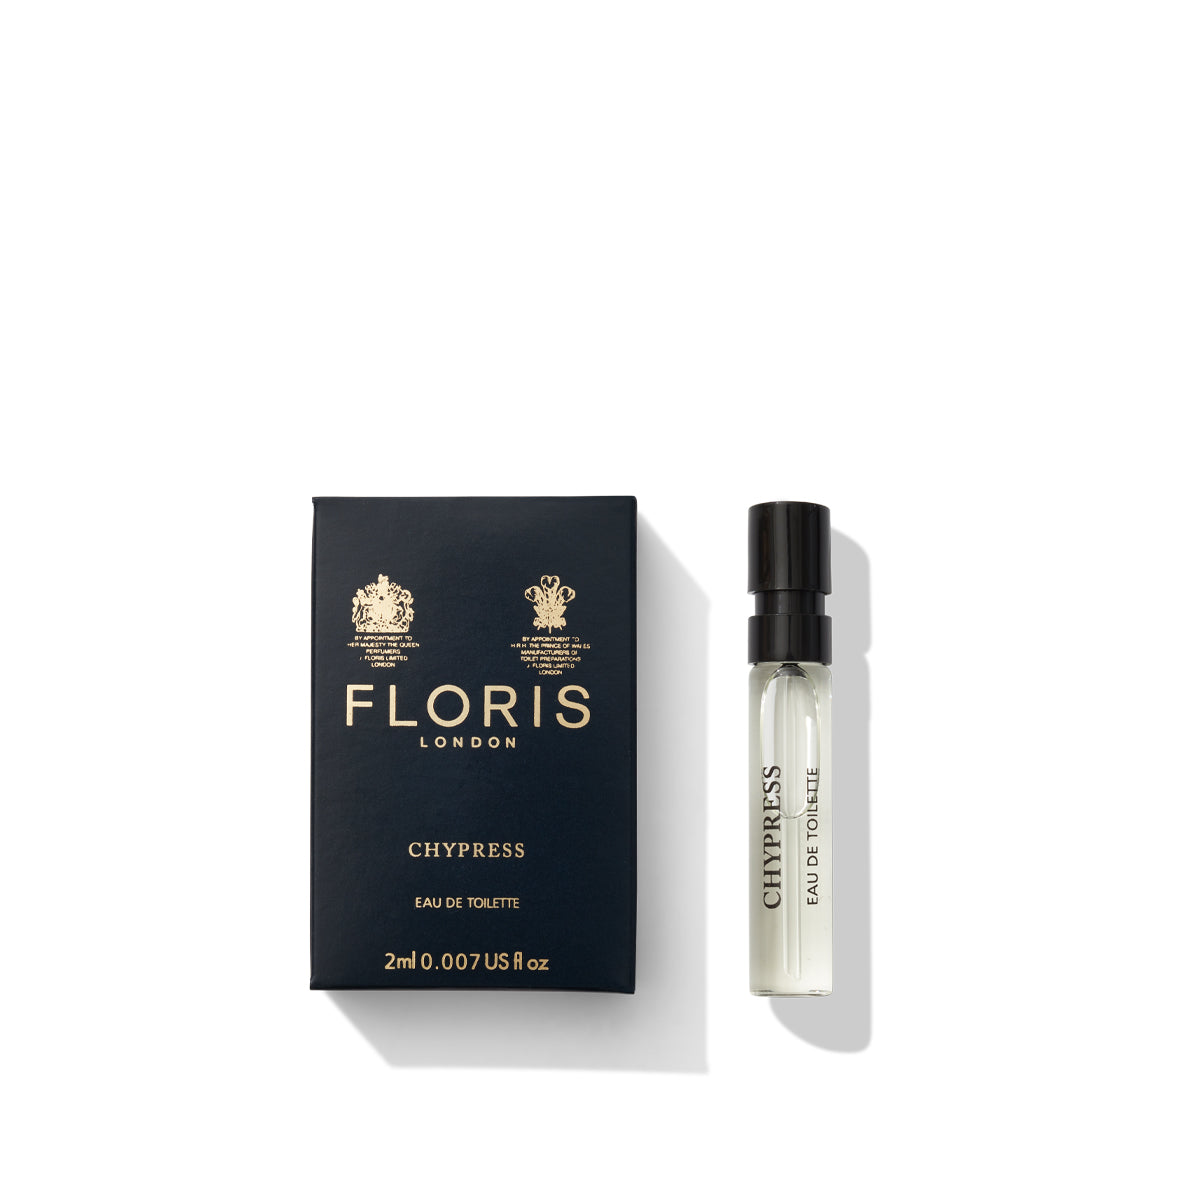 Floris London's Chypress - Eau de Toilette, highlighted by its enveloping musk and floral chypre notes, sits elegantly in a 2ml vial next to a stylish black box on a pristine white background.